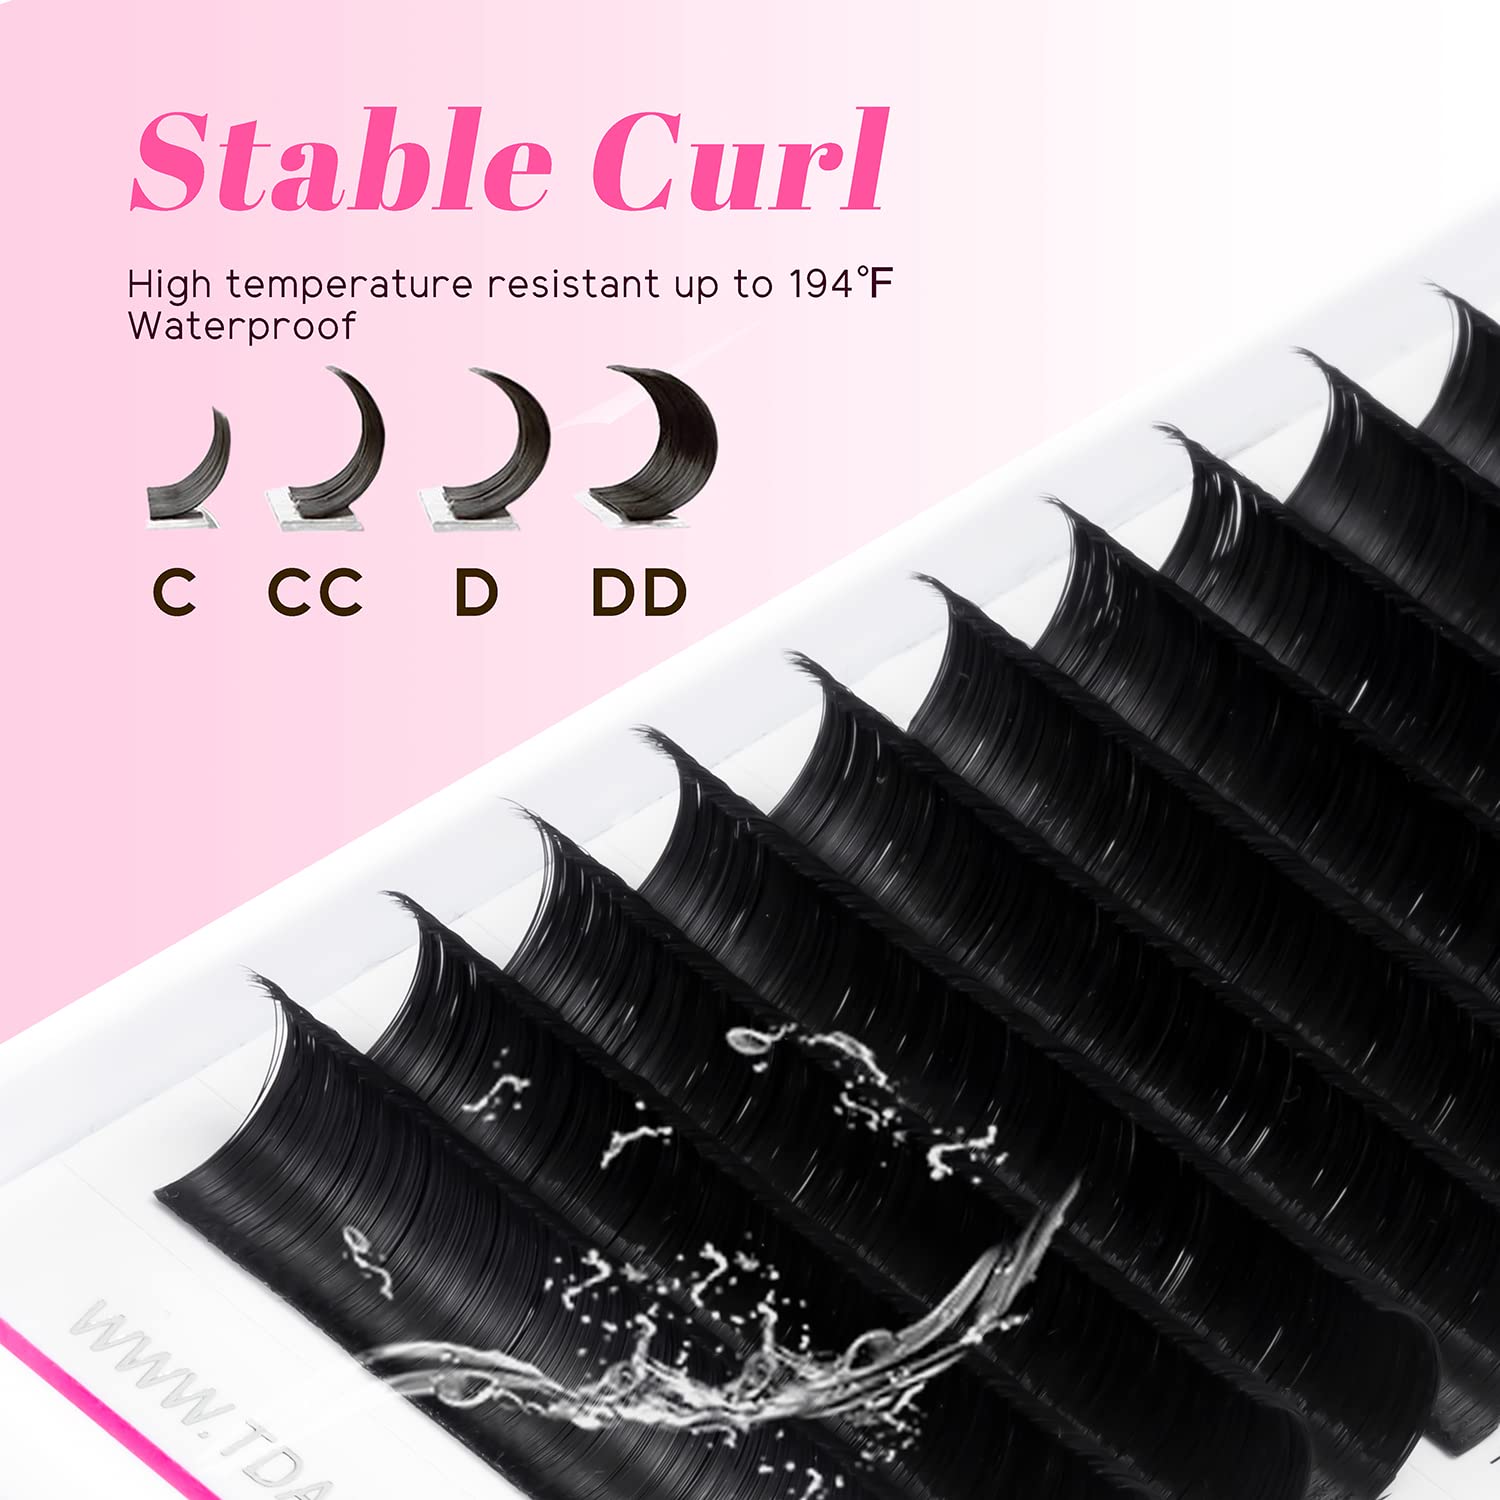 TDANCE Eyelash Extension Supplies Rapid Blooming Volume Eyelash Extensions Thickness 0.05 CC Curl 16mm Easy Fan Volume Lashes Self Fanning Individual Eyelashes Extension (CC-0.05,16mm)